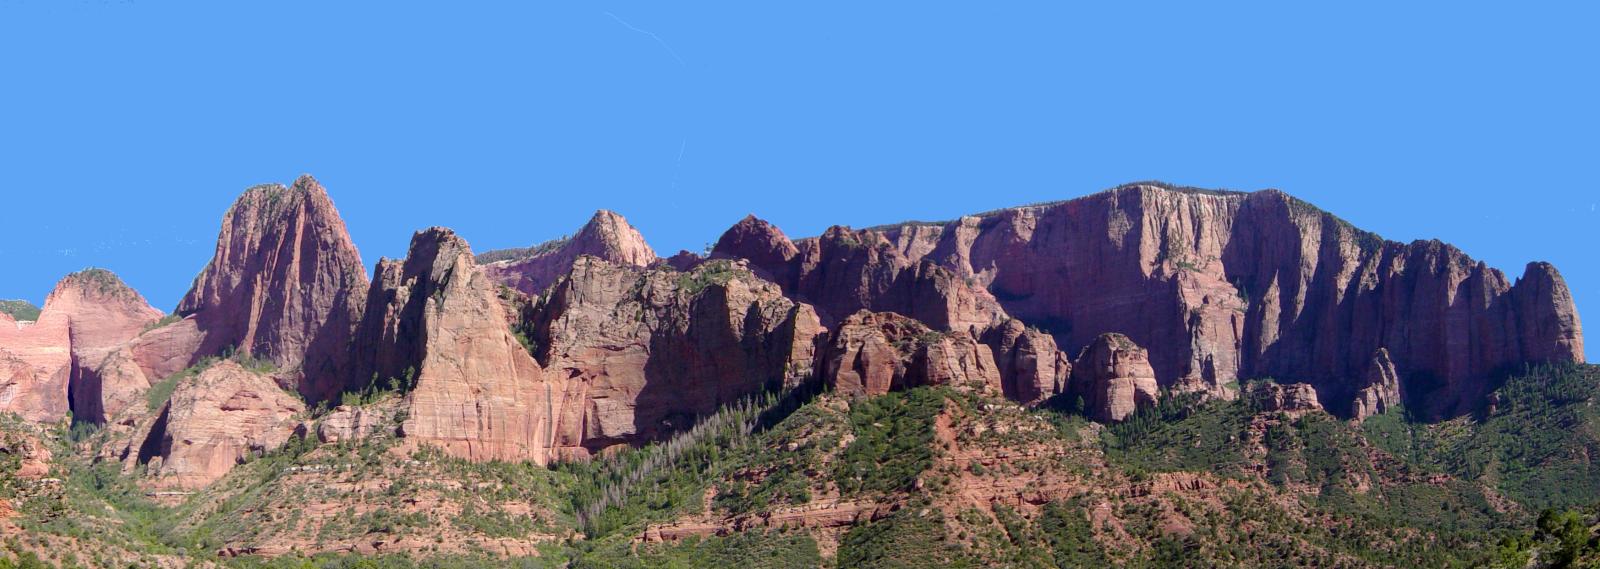 The Kolob Canyons are a set of finger canyons cut into the Kolob Plateau. Timber Top Mountain to right